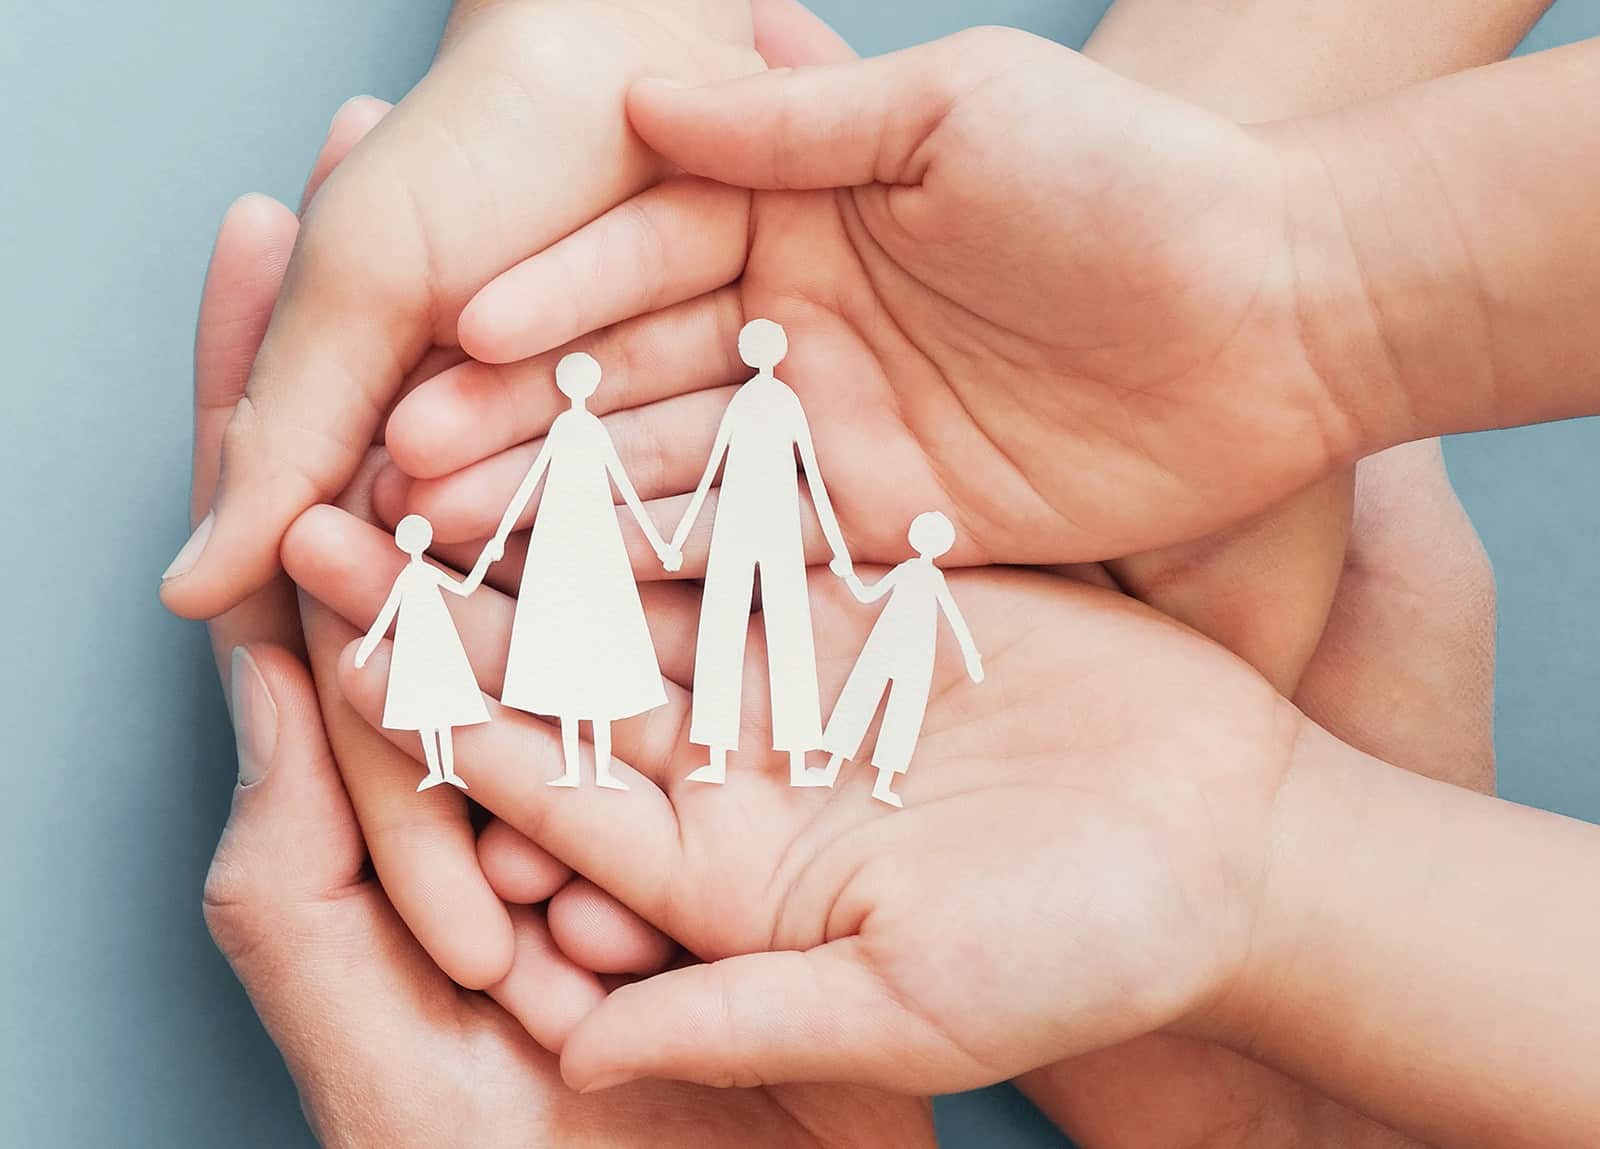 A set of 3 hands holding together a cut-out of a family